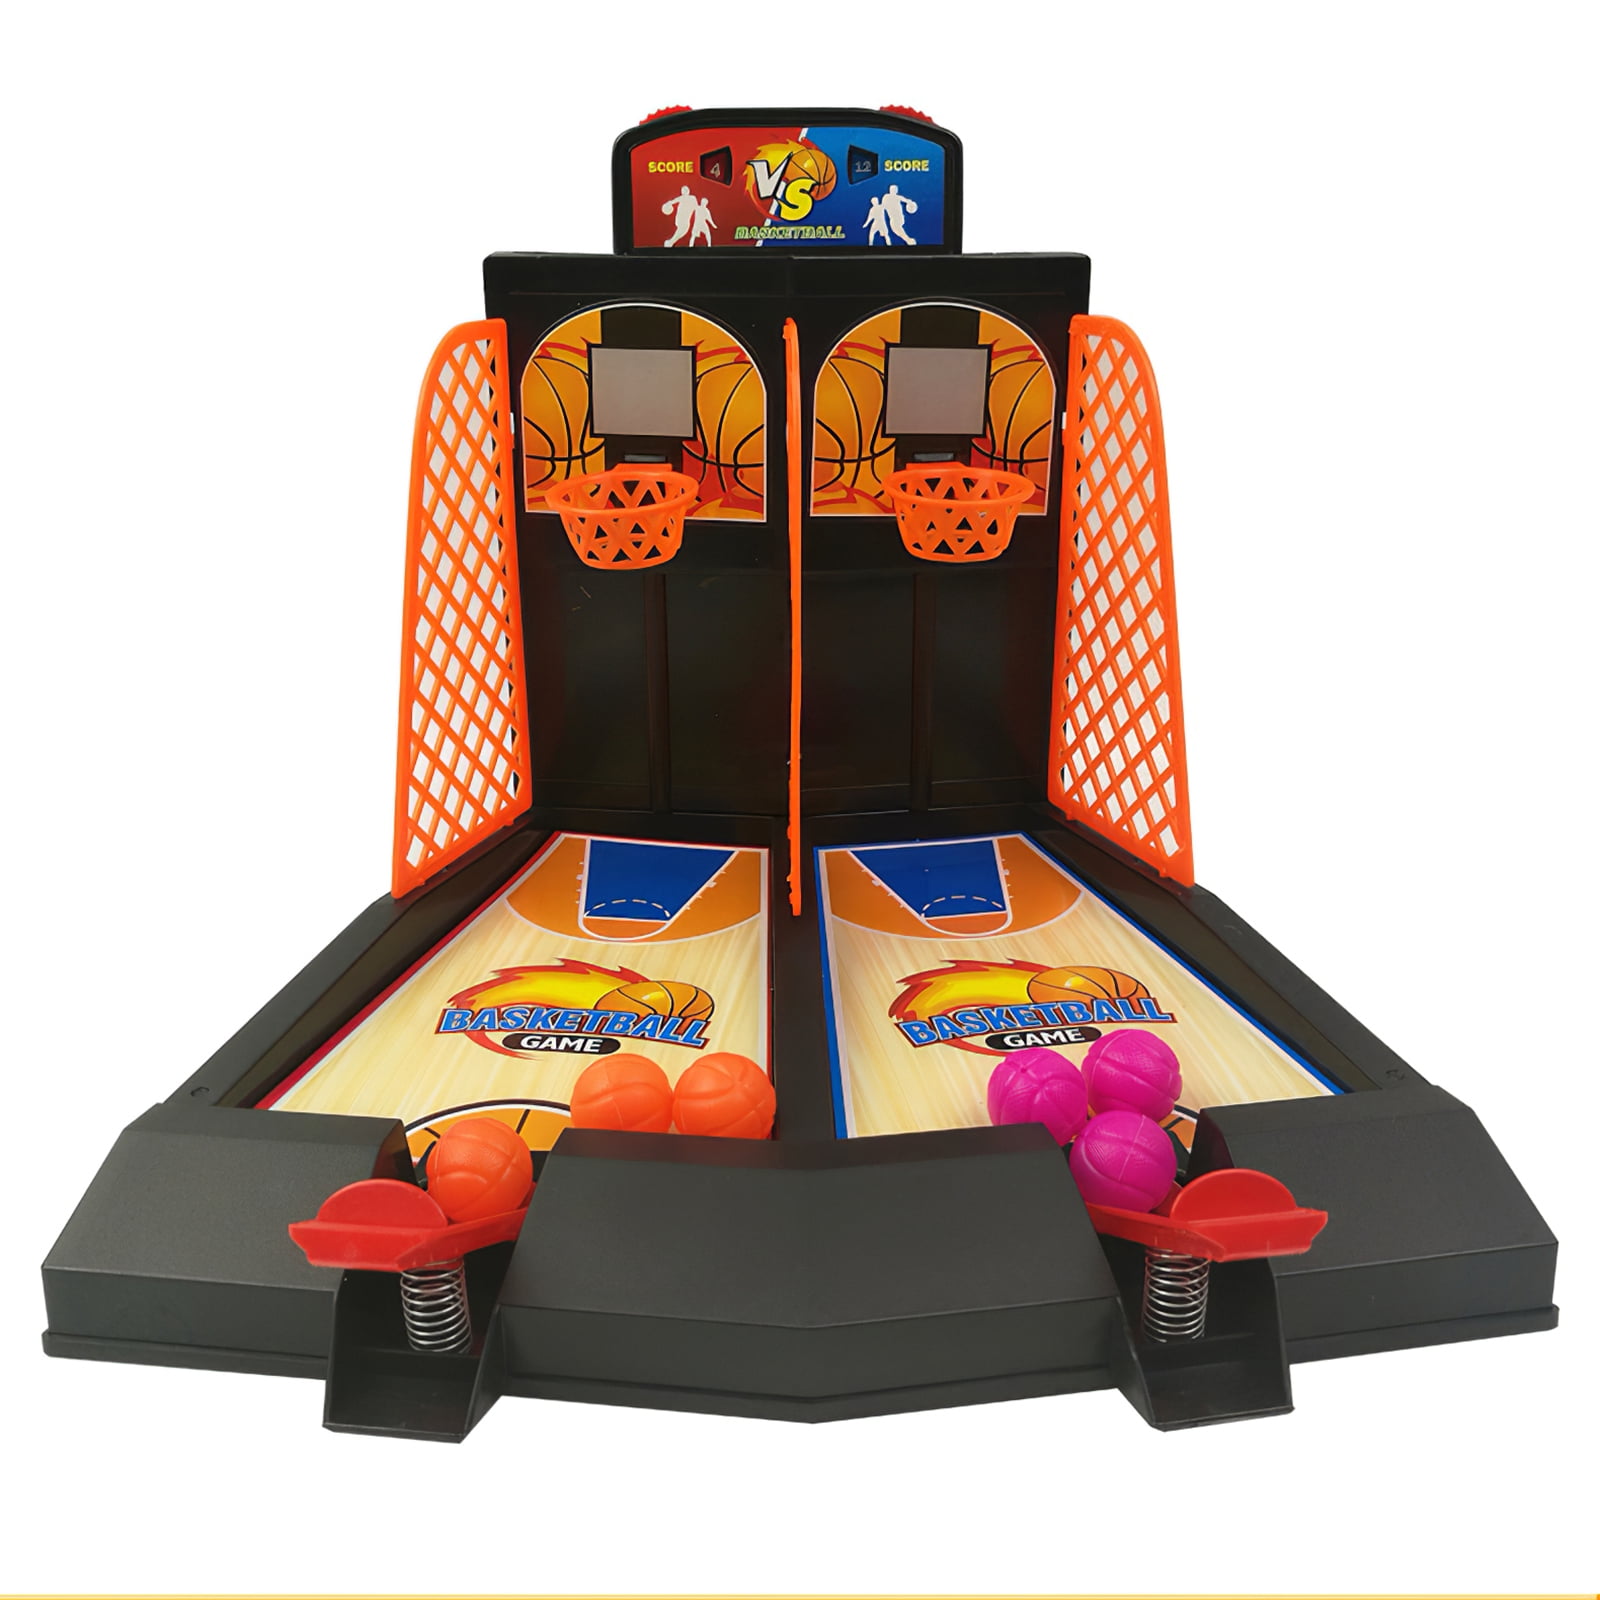 Toma Desktop Basketball Game Toy Table Basketball Court Easy to Assemble Finger Basketball Game Toy with 6 Balls for Home Children Kids